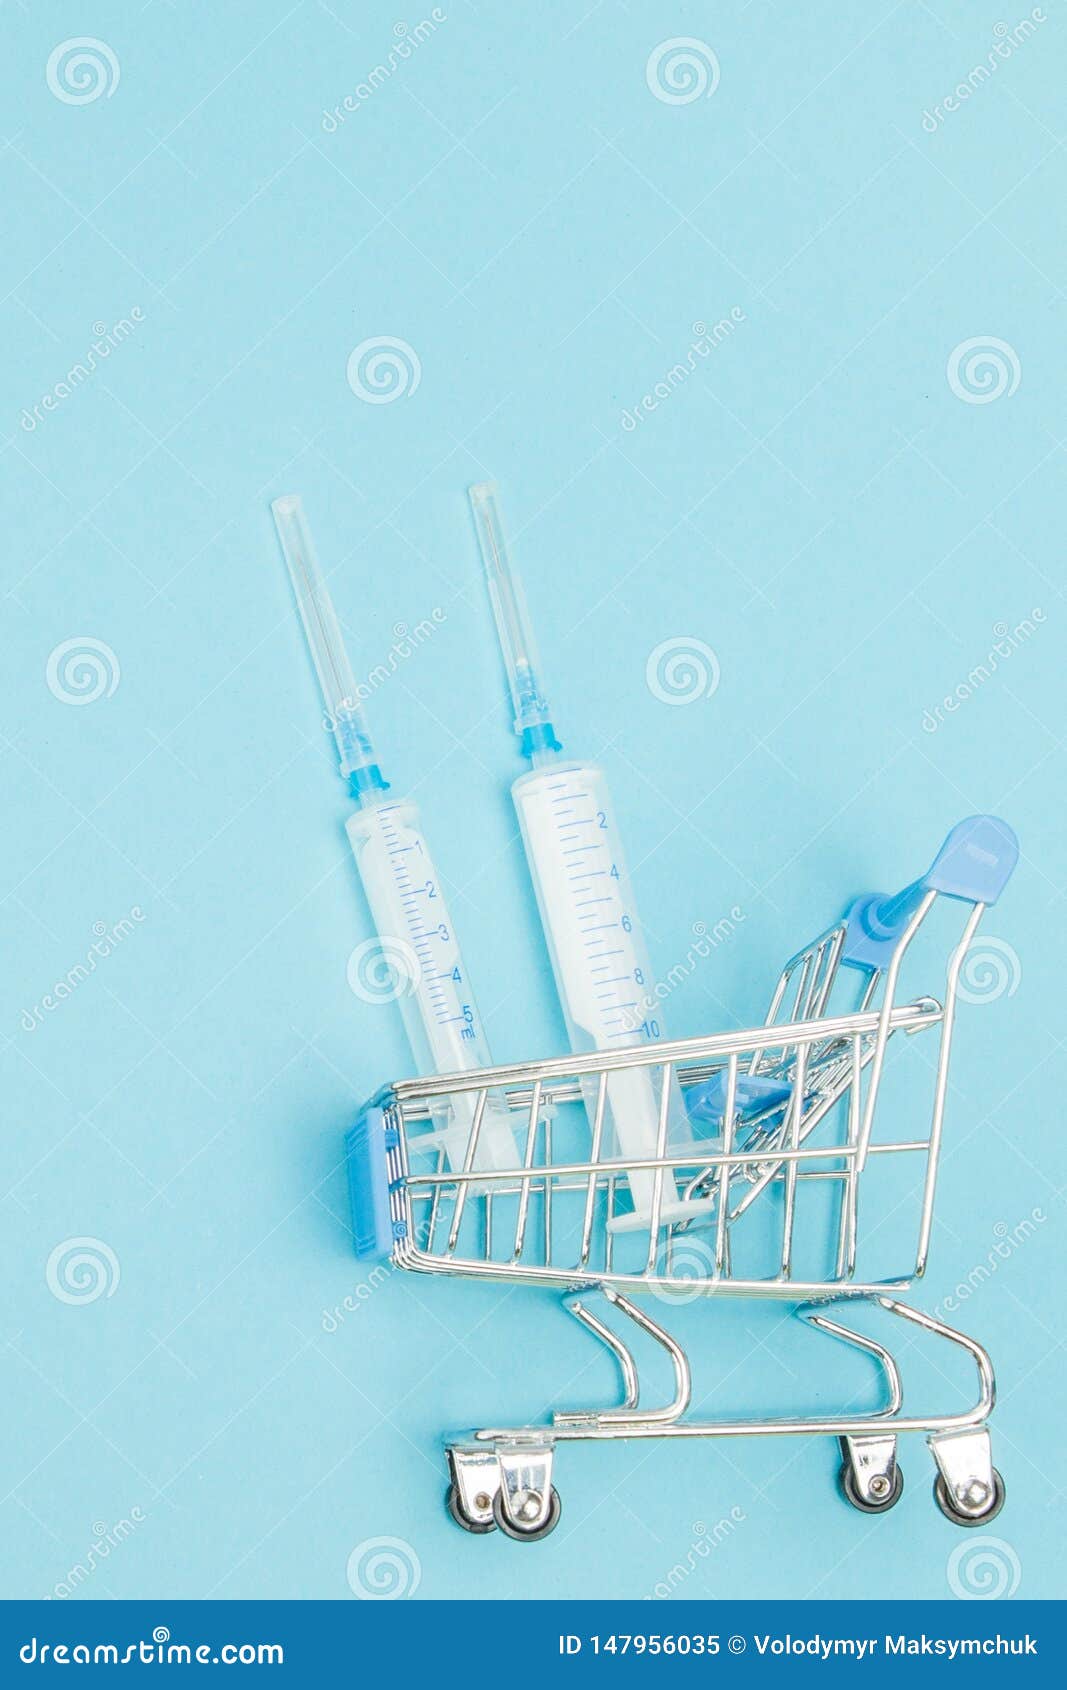 Medical Injection in Shopping Trolley on Blue Background. Creative Idea